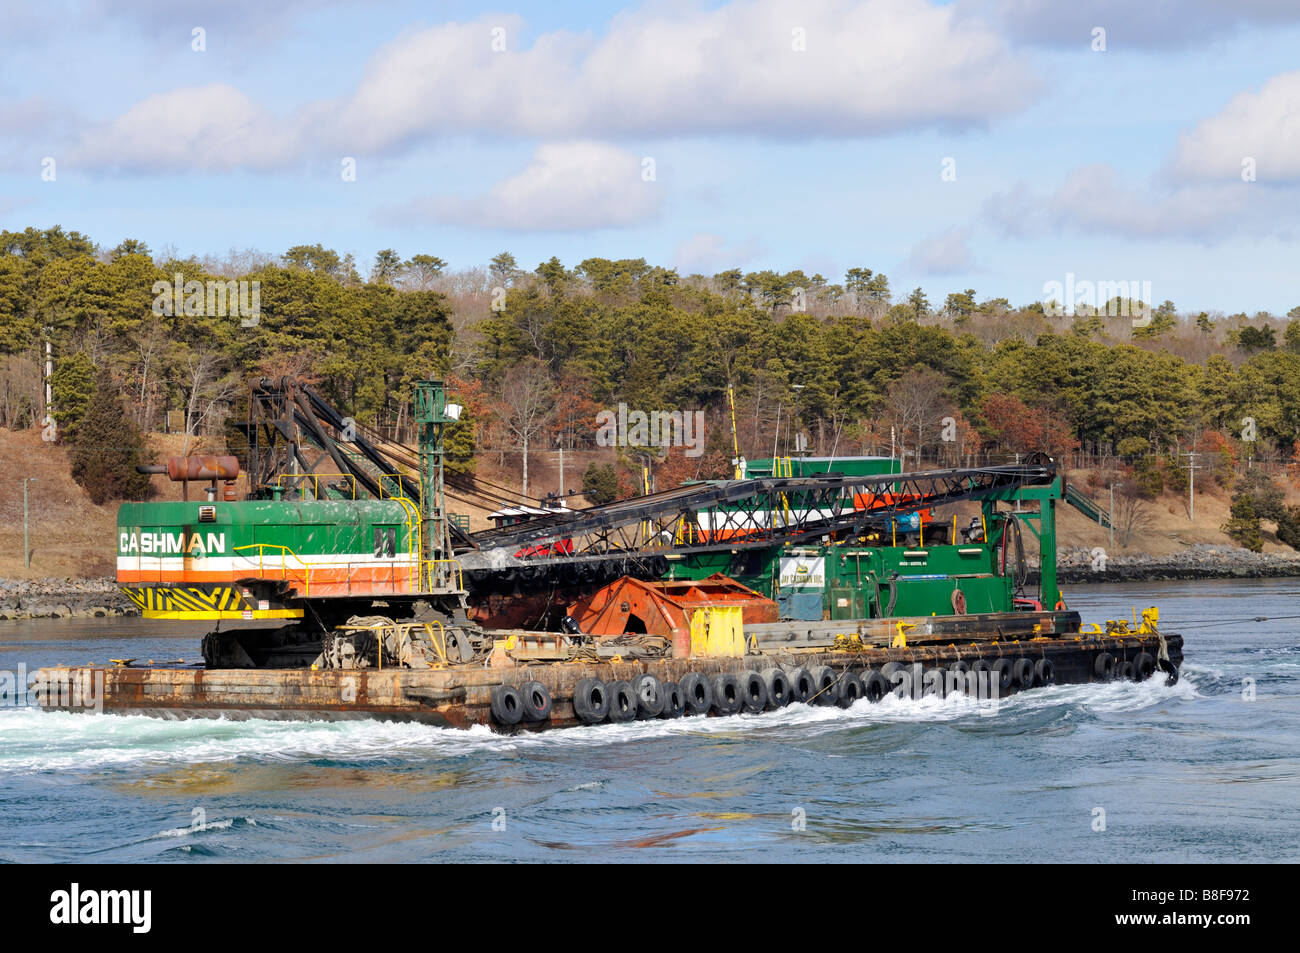 Crane and heavy equipment from Cashman Company being transported by barge in the 'Cape Cod Canal' Stock Photo